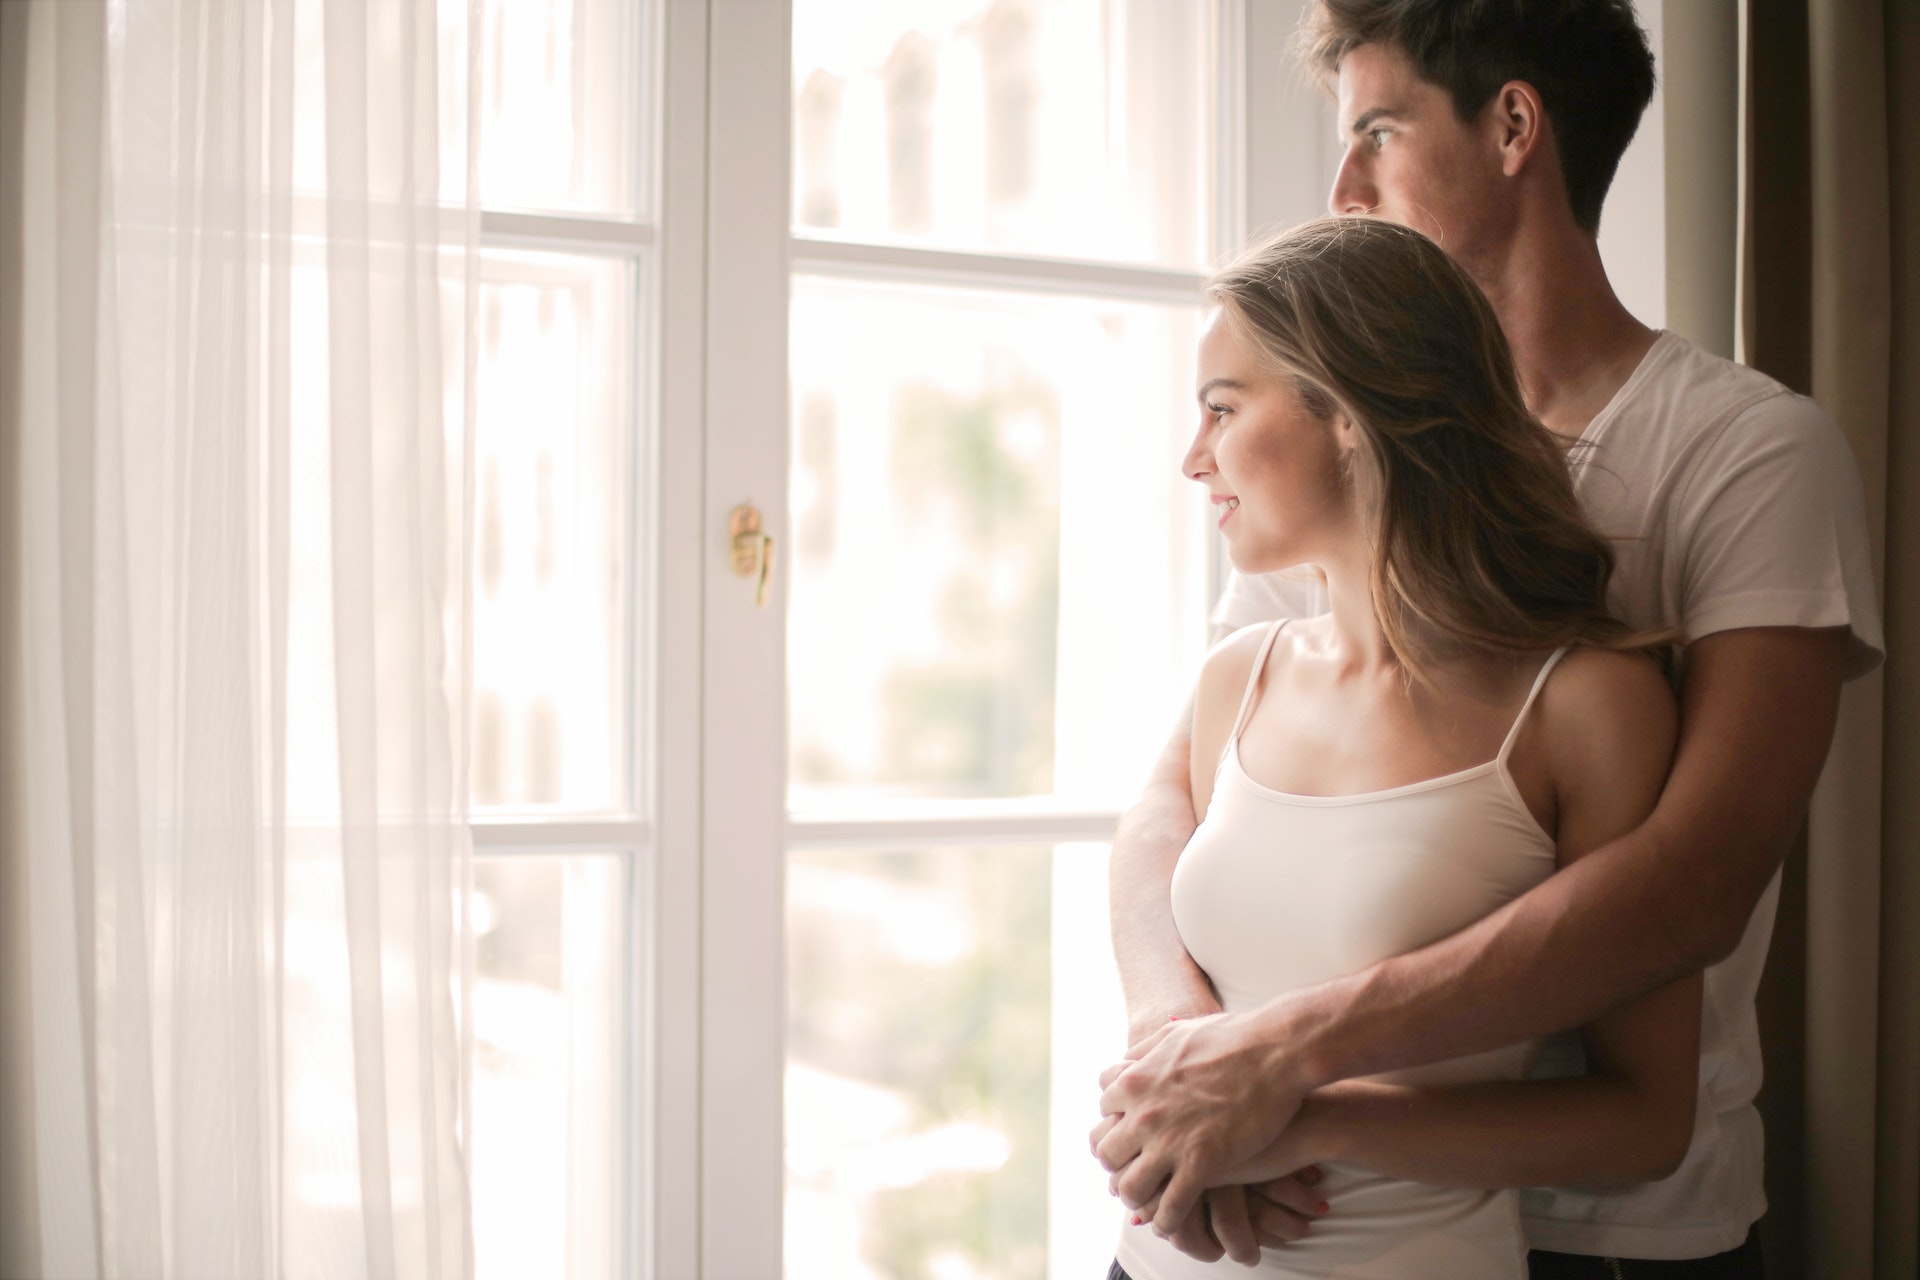 A man and woman standing by a window | Source: Pexels